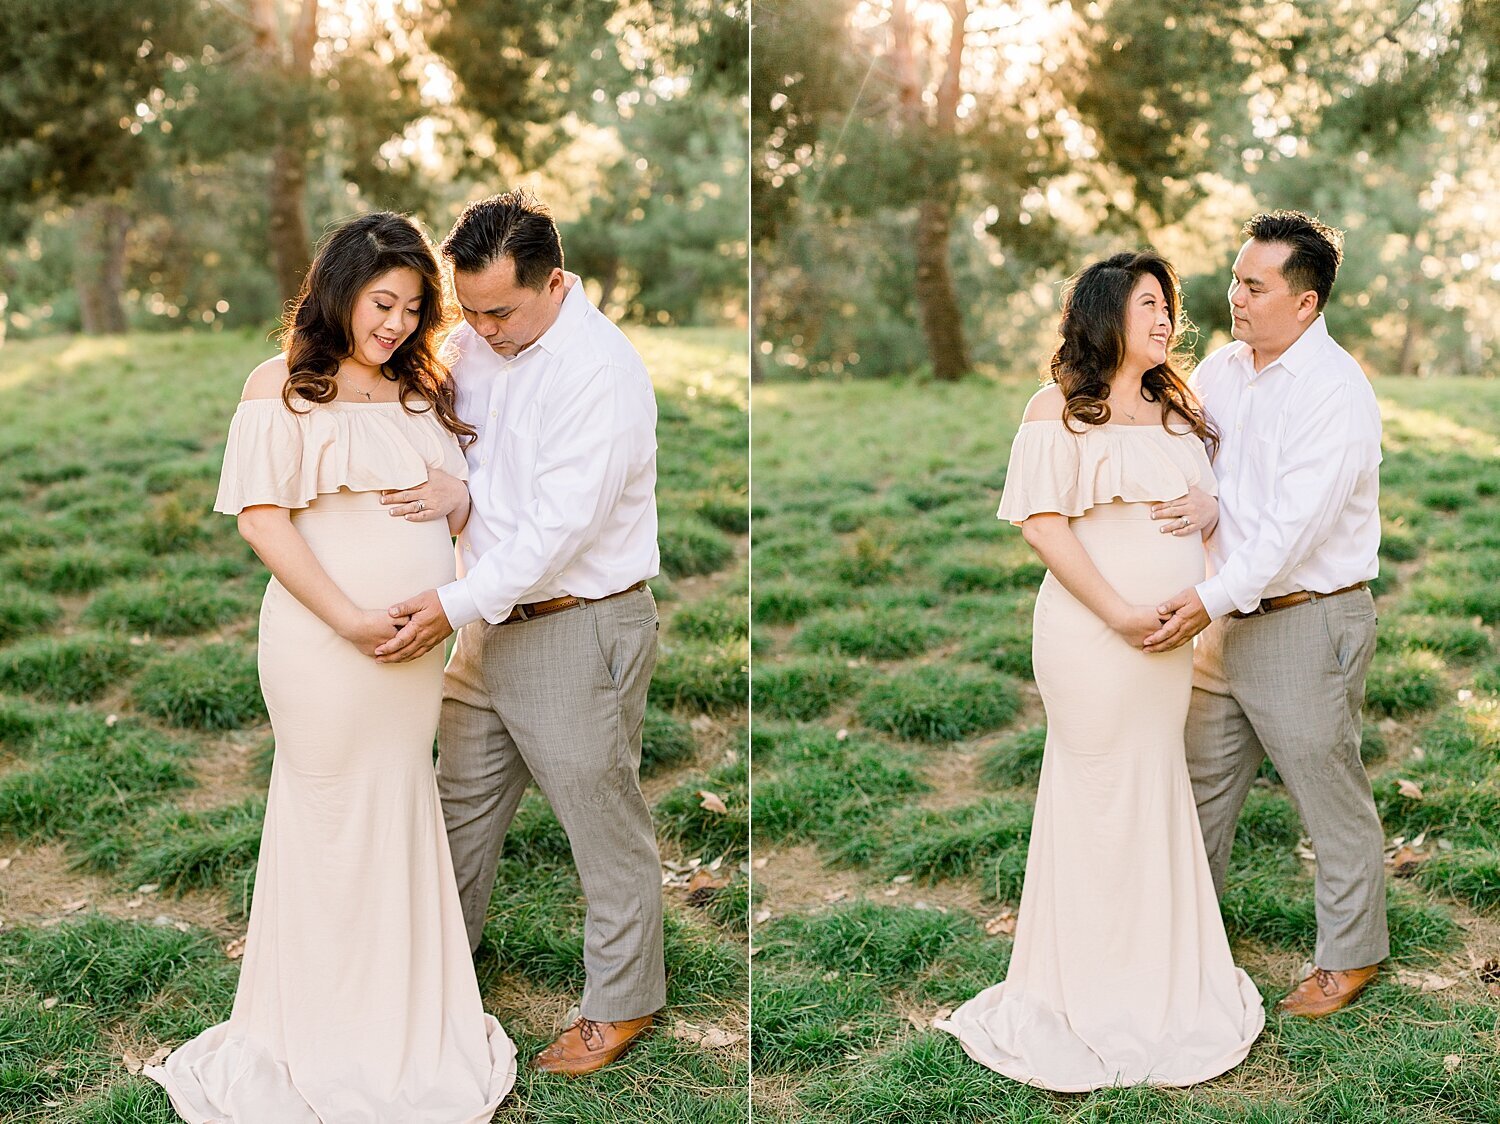 Sweet moment between first-time parents at maternity photoshoot in Irvine. Ambre Williams Photography.